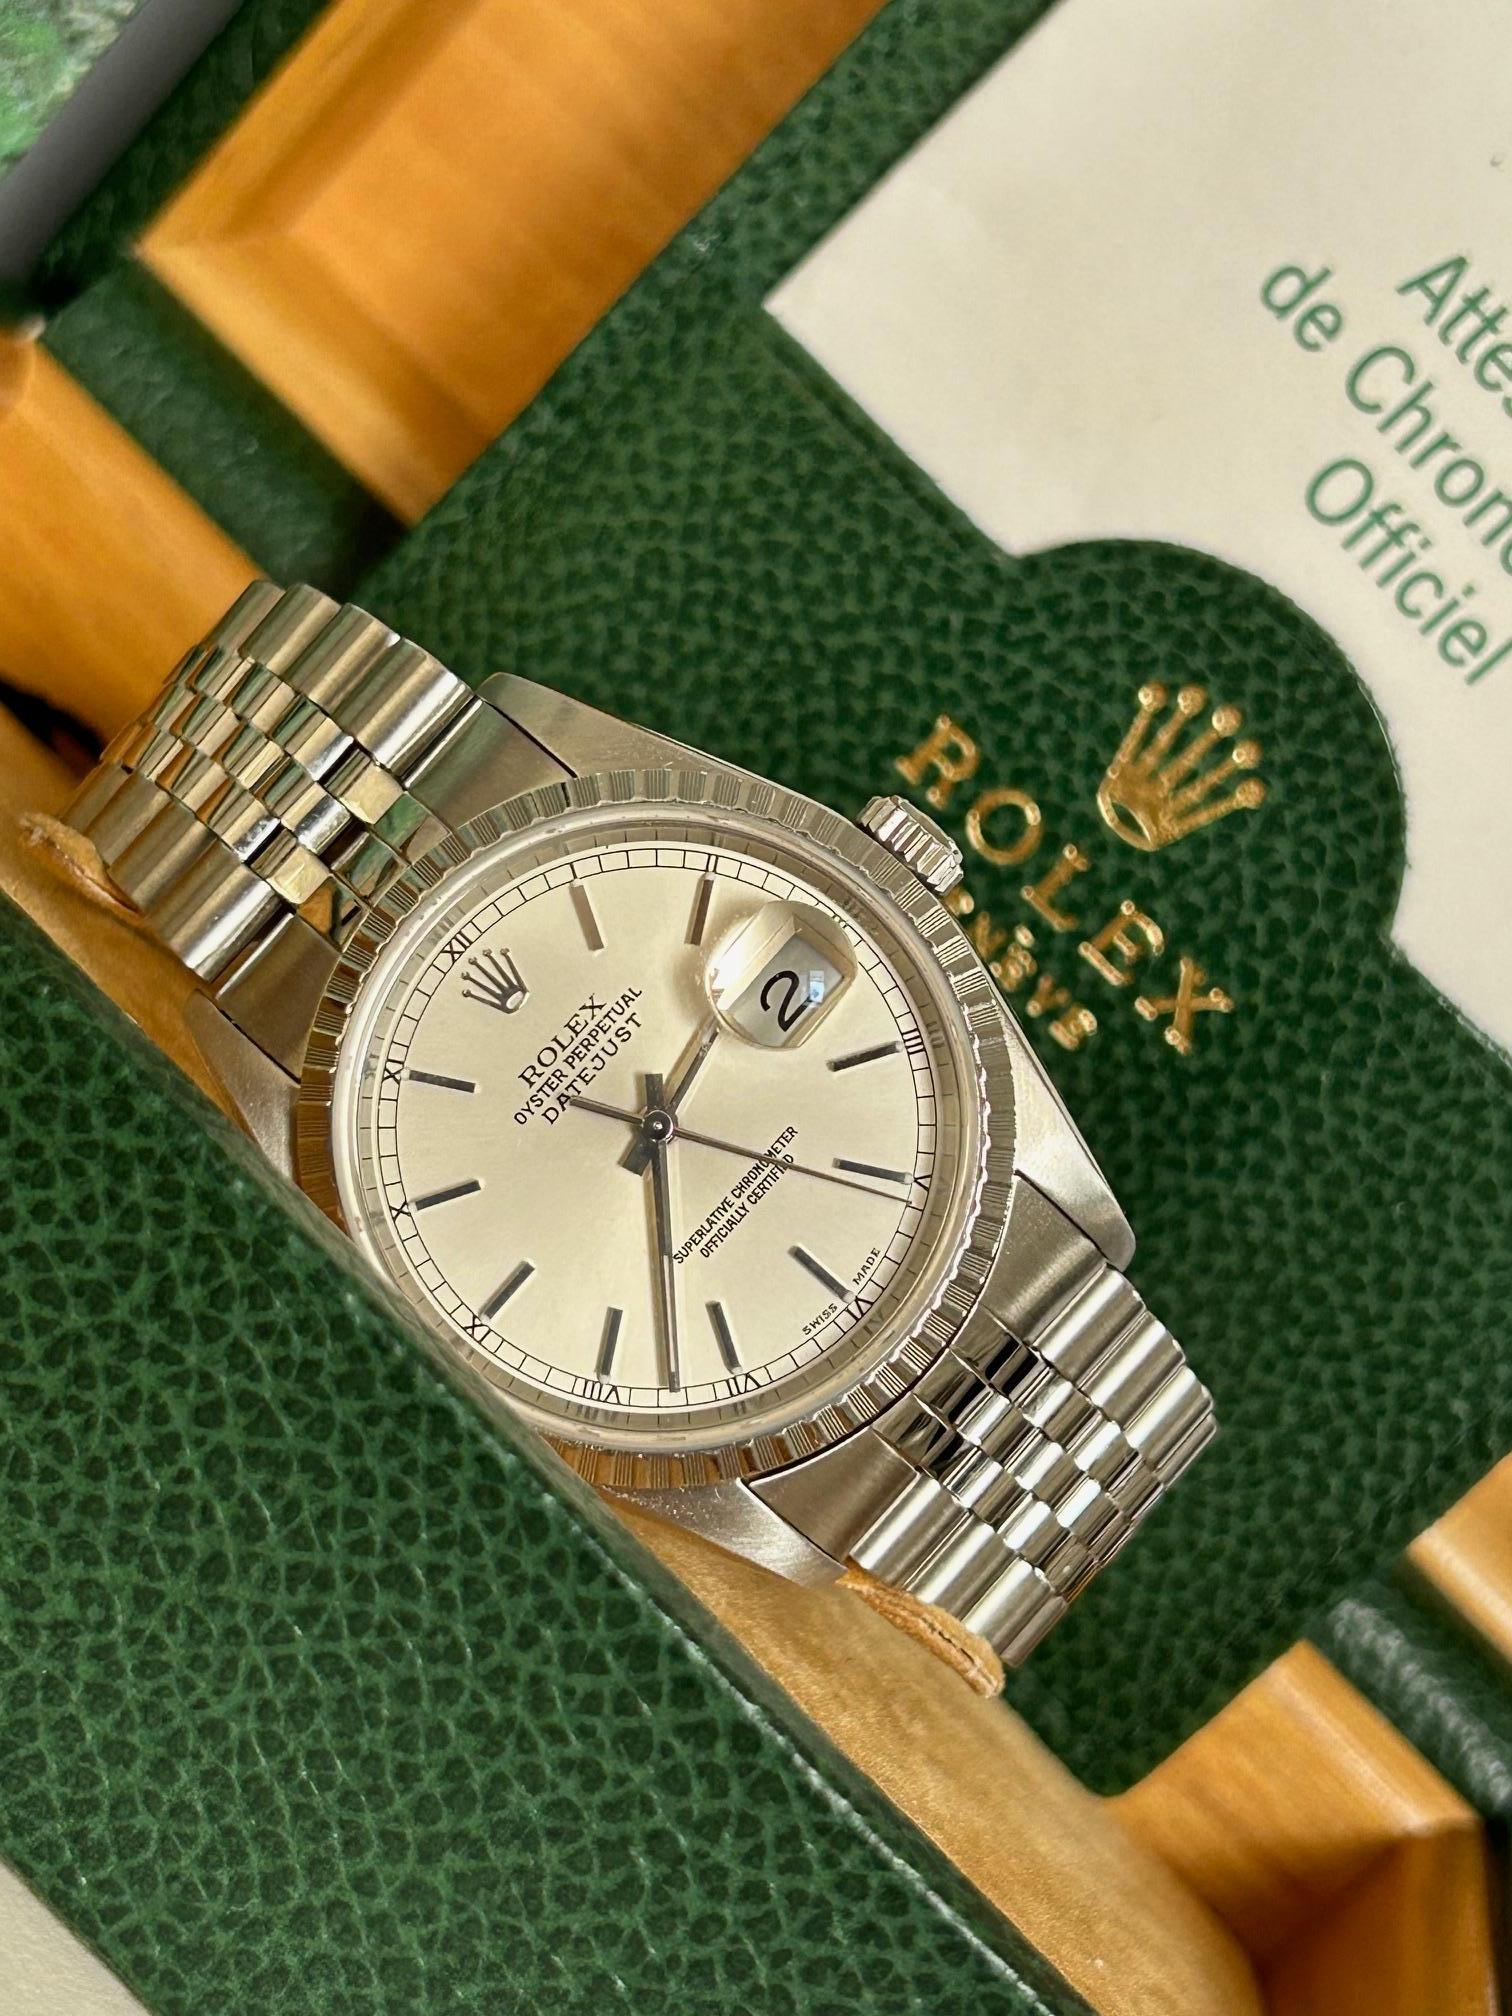 Rolex Datejust Ref 16220 Wristwatch, Jubilee Bracelet, Full Set, UK 2003. In Excellent Condition For Sale In Canterbury, GB